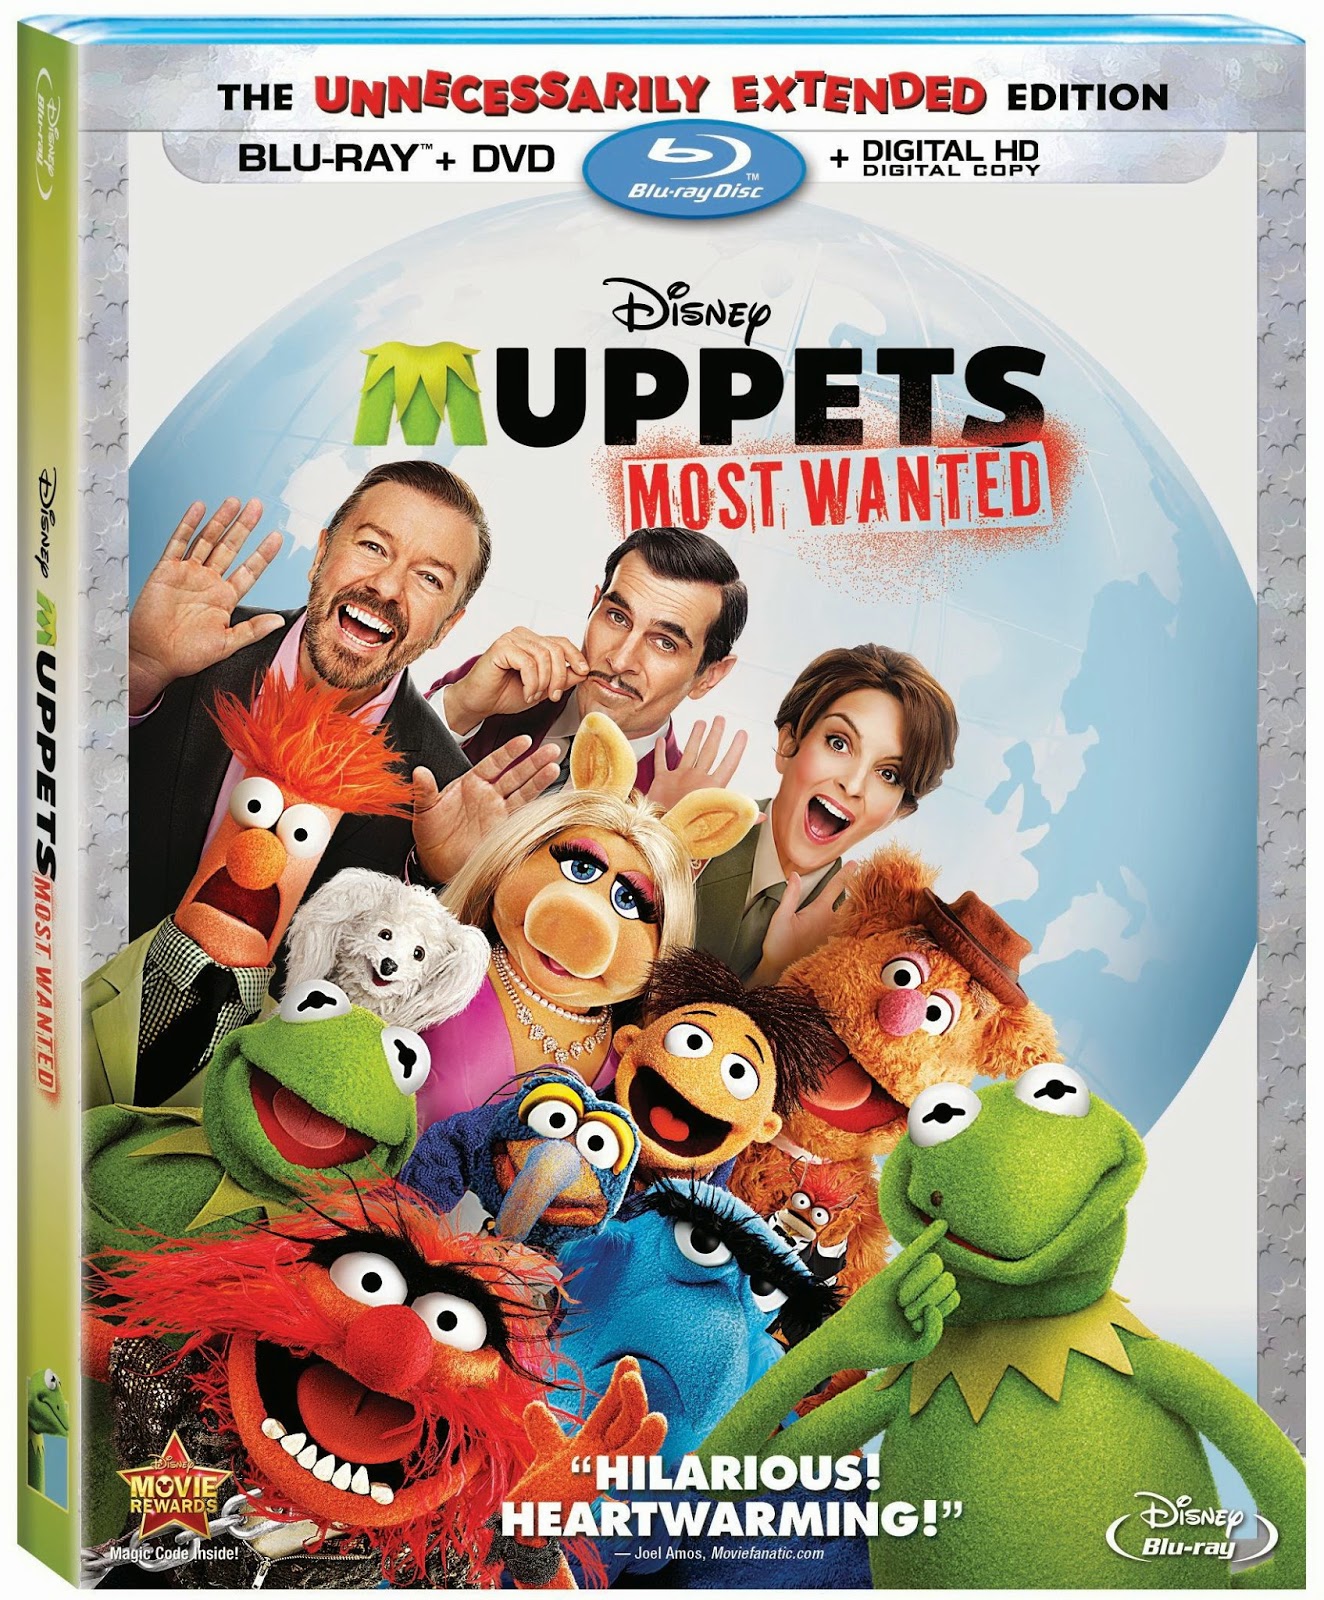 The Muppets (2011)Bluray